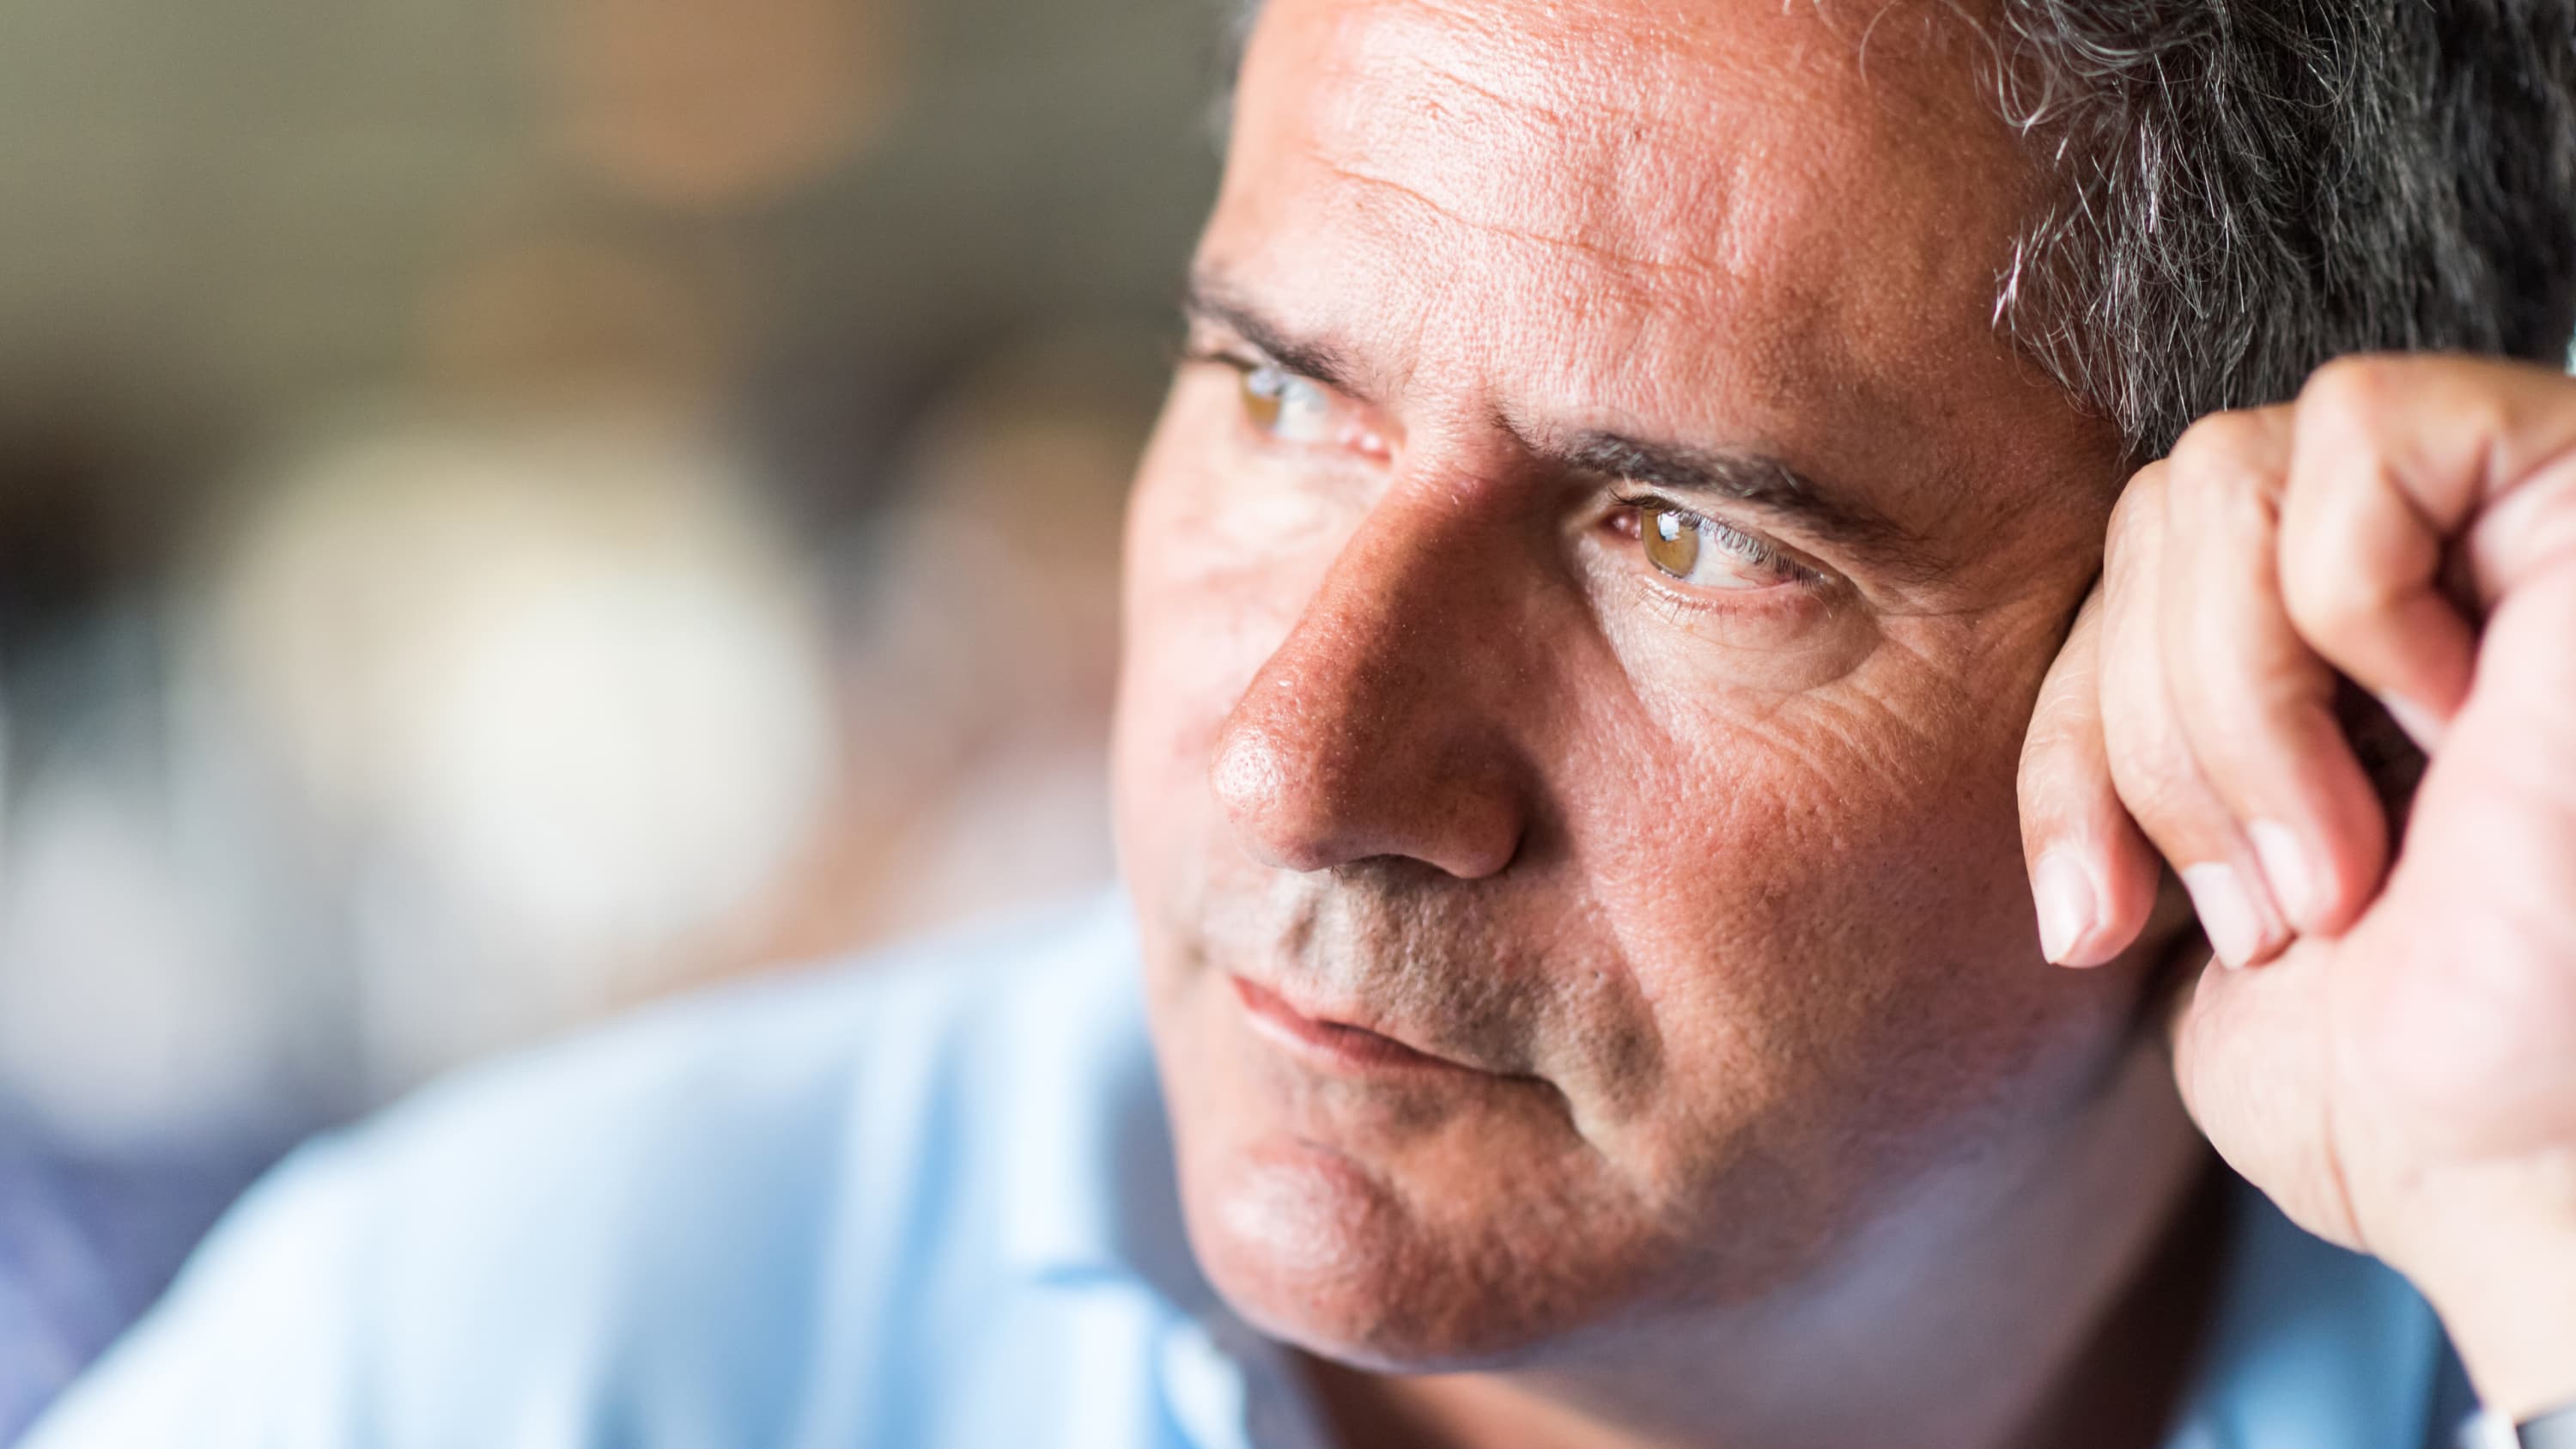 A man looks thoughtful, possibly thinking about erectile dysfunction